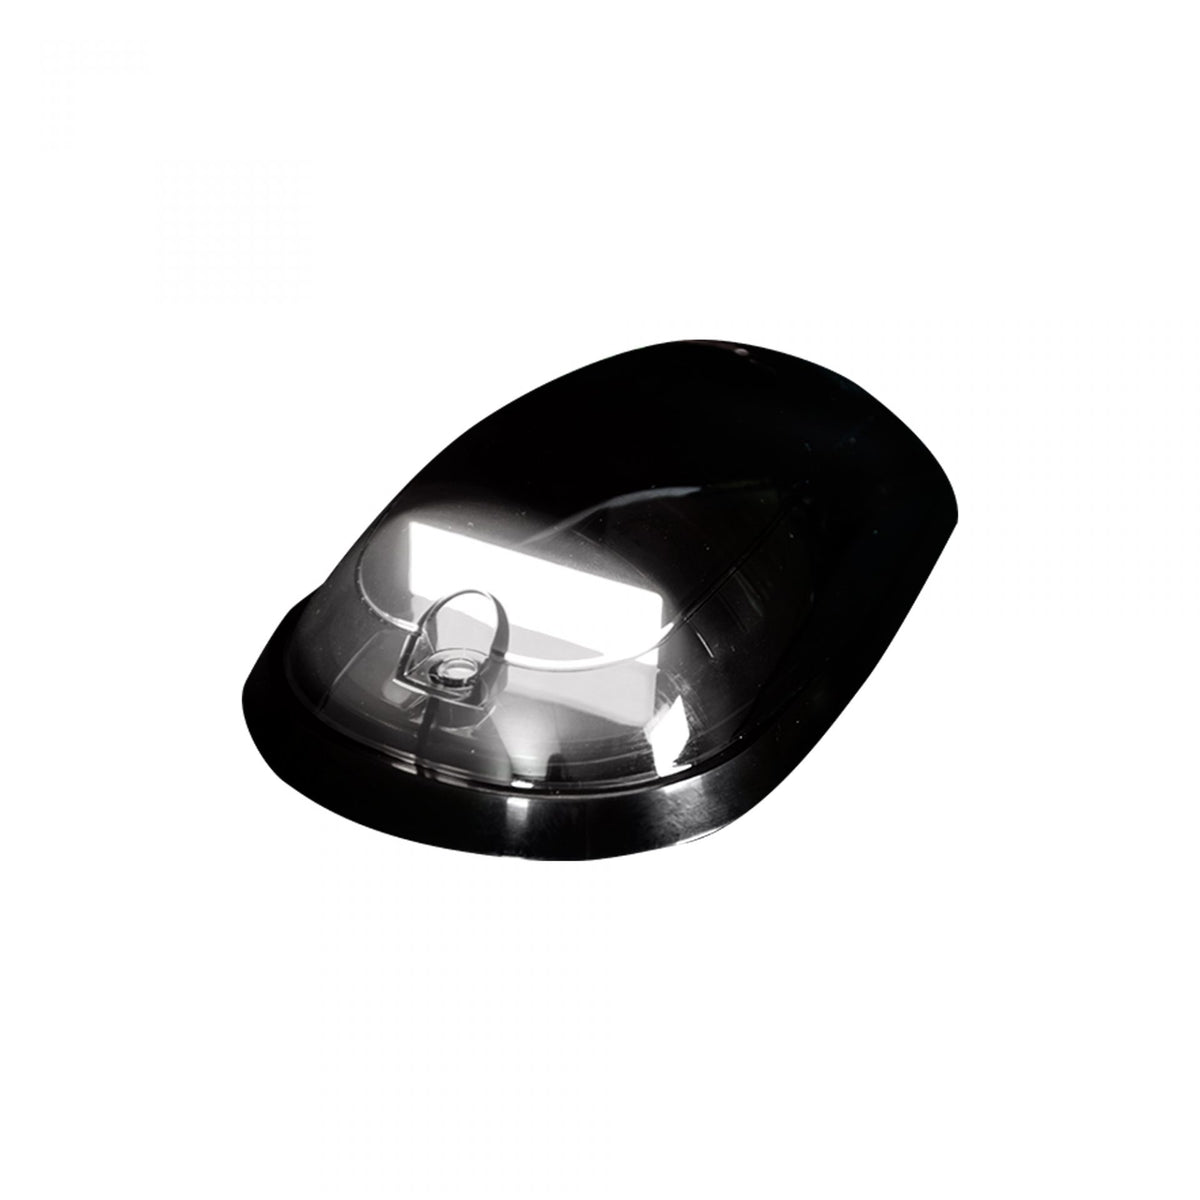 Dodge Heavy-Duty 2500/3500 03-19 Single Cab Light OLED Smoked Lens in White